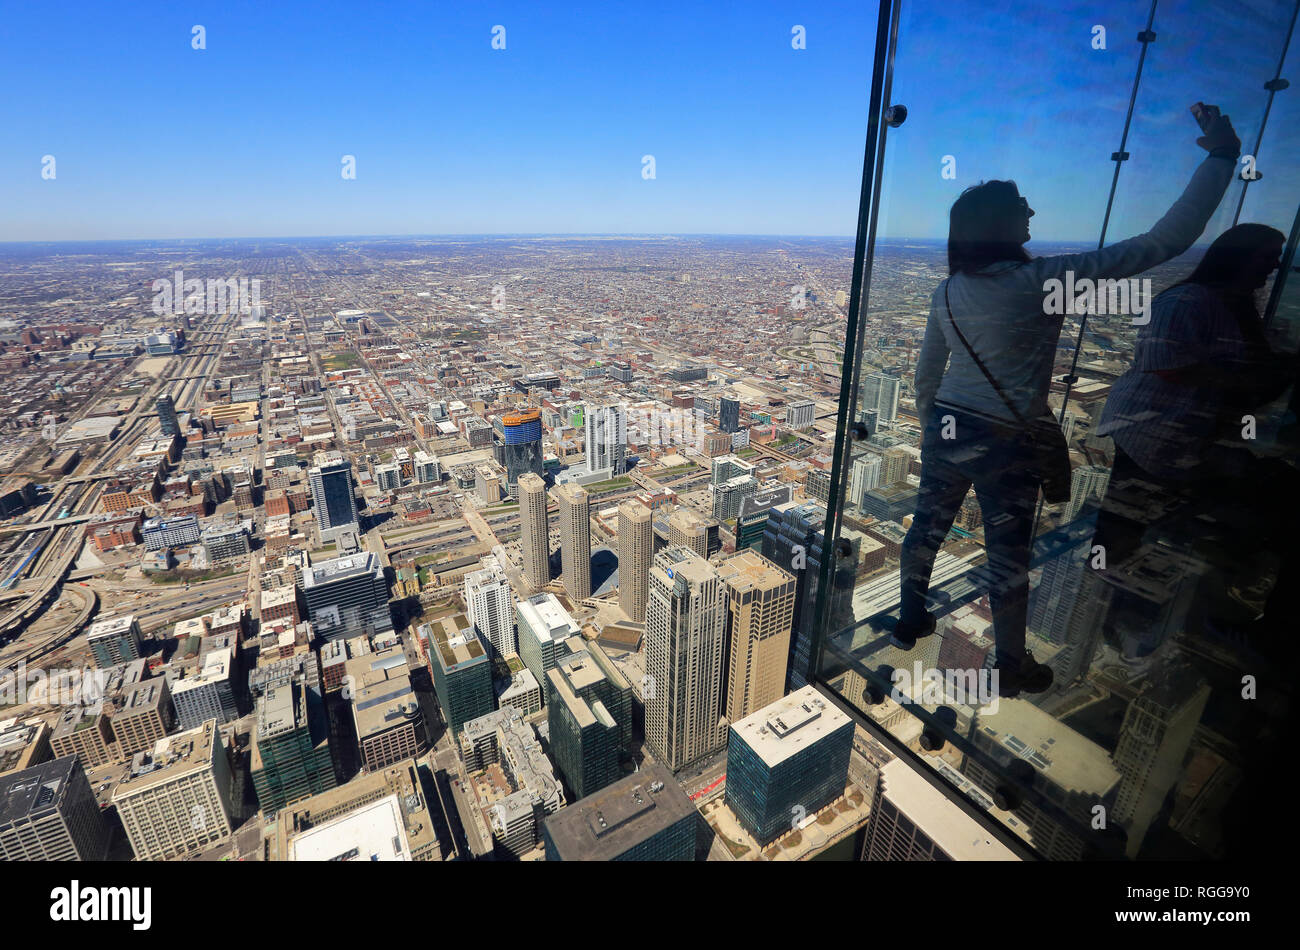 Tourists taking selfie on "The Ledge" of the Skydeck observation deck on top of the Willis Tower (former Sears Tower). Chicago, Illinois, USA Stock Photo